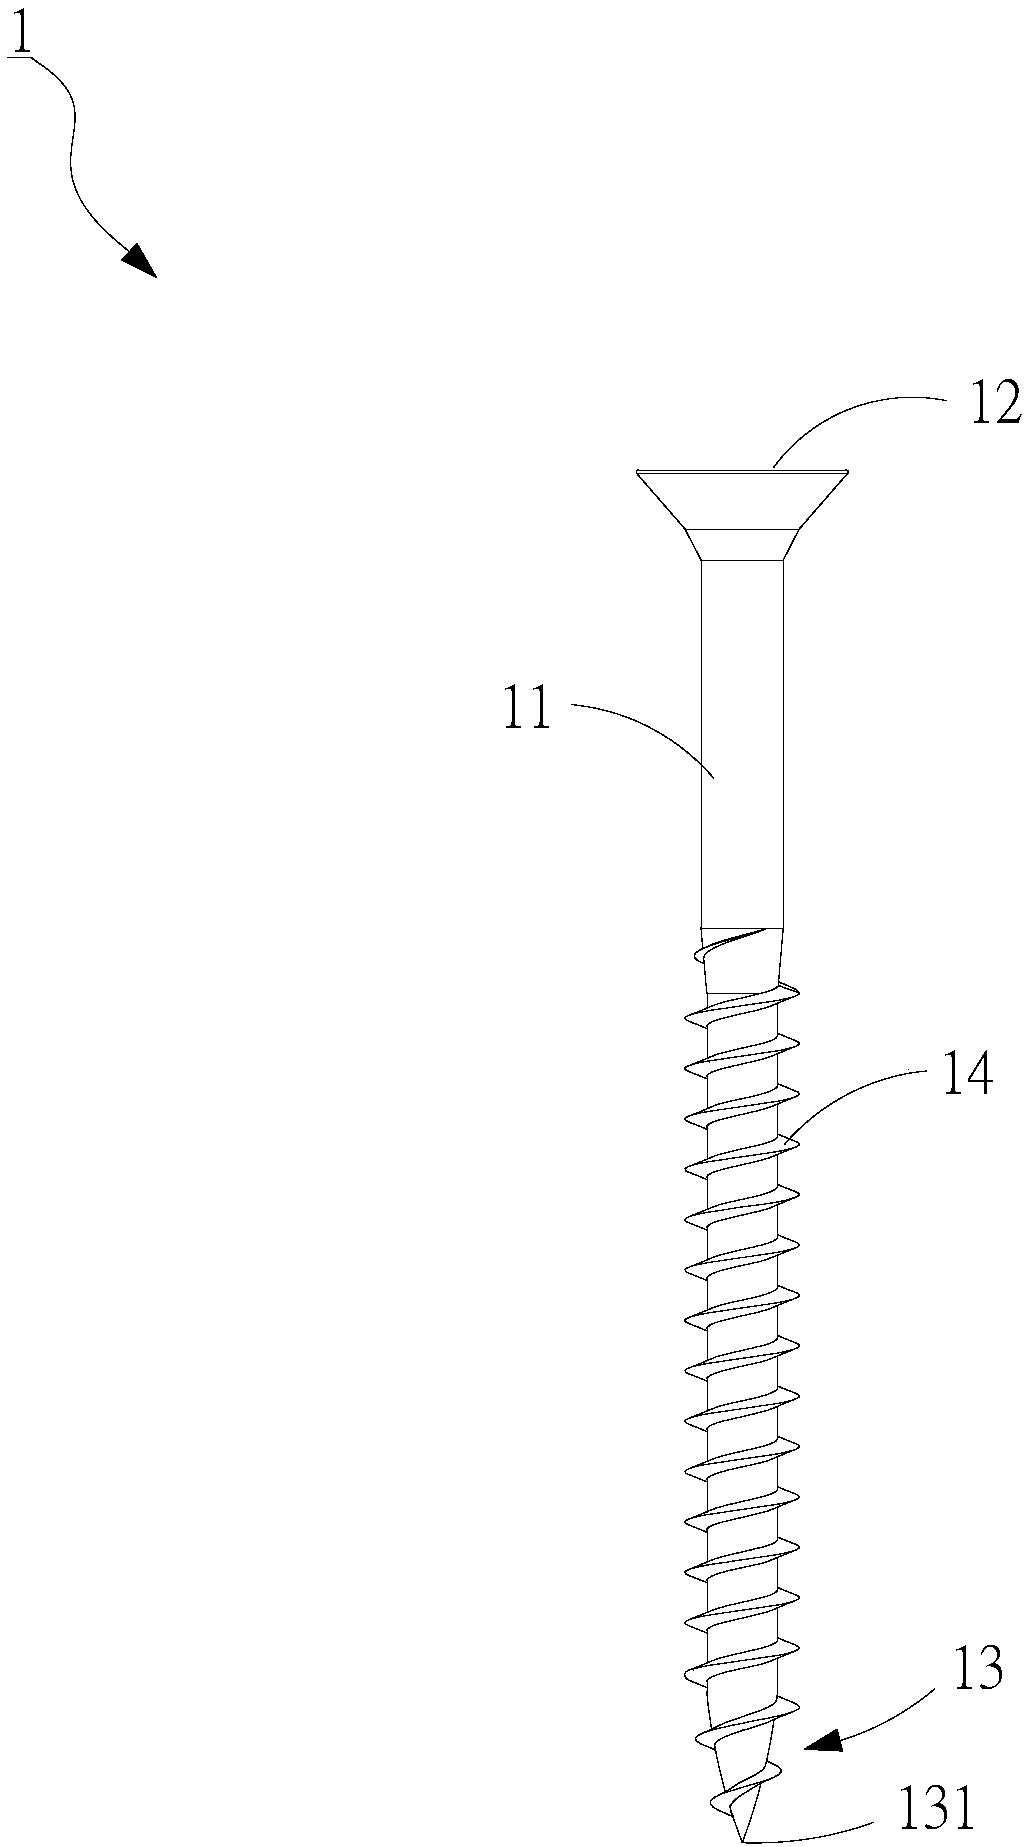 Screw with low spin lock torque